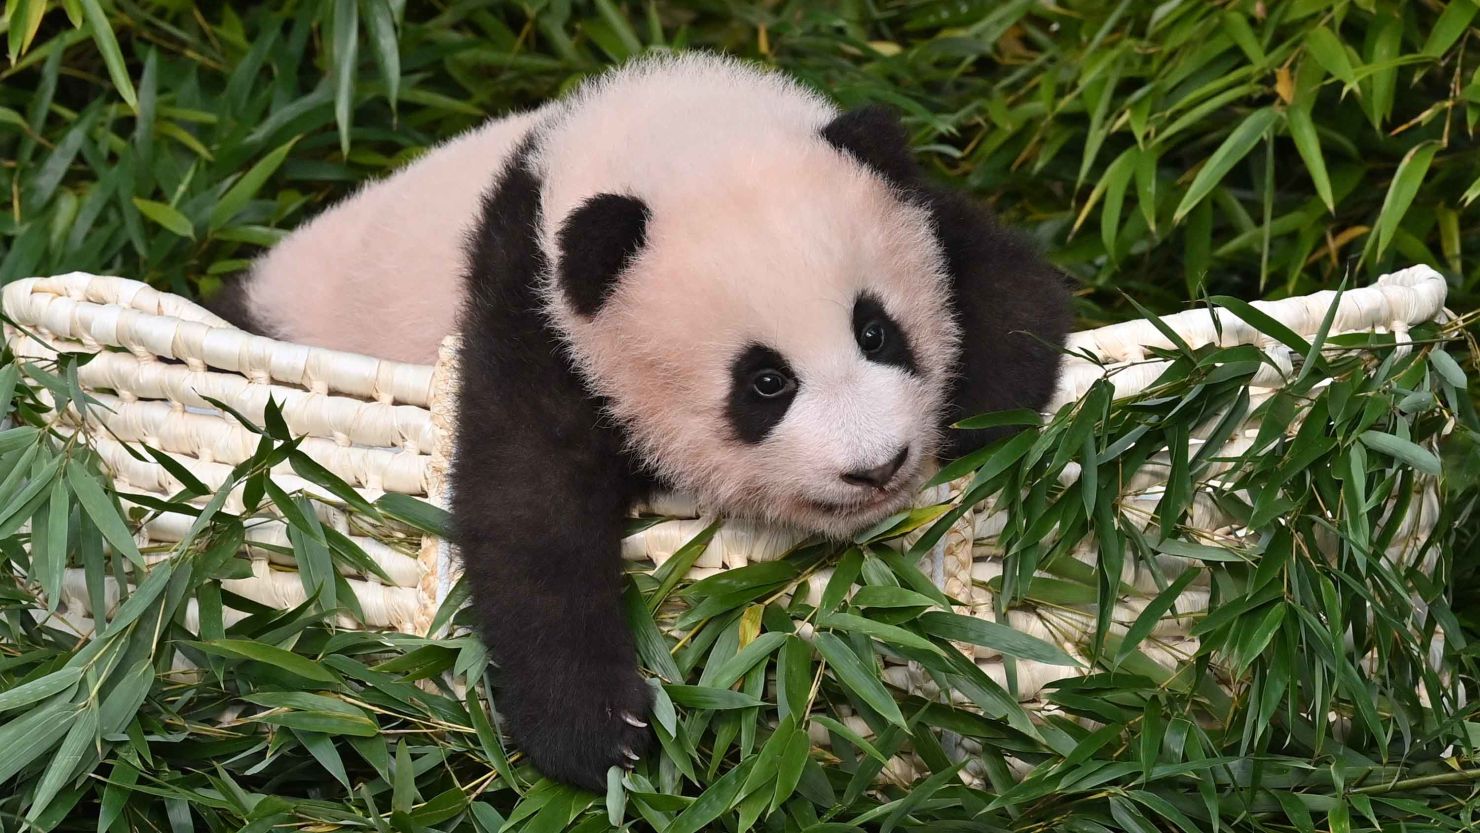 Panda cub Fu Bao is pictured during a ceremony to reveal her name at Everland Amusement and Animal Park in Yongin on November 4, 2020.  